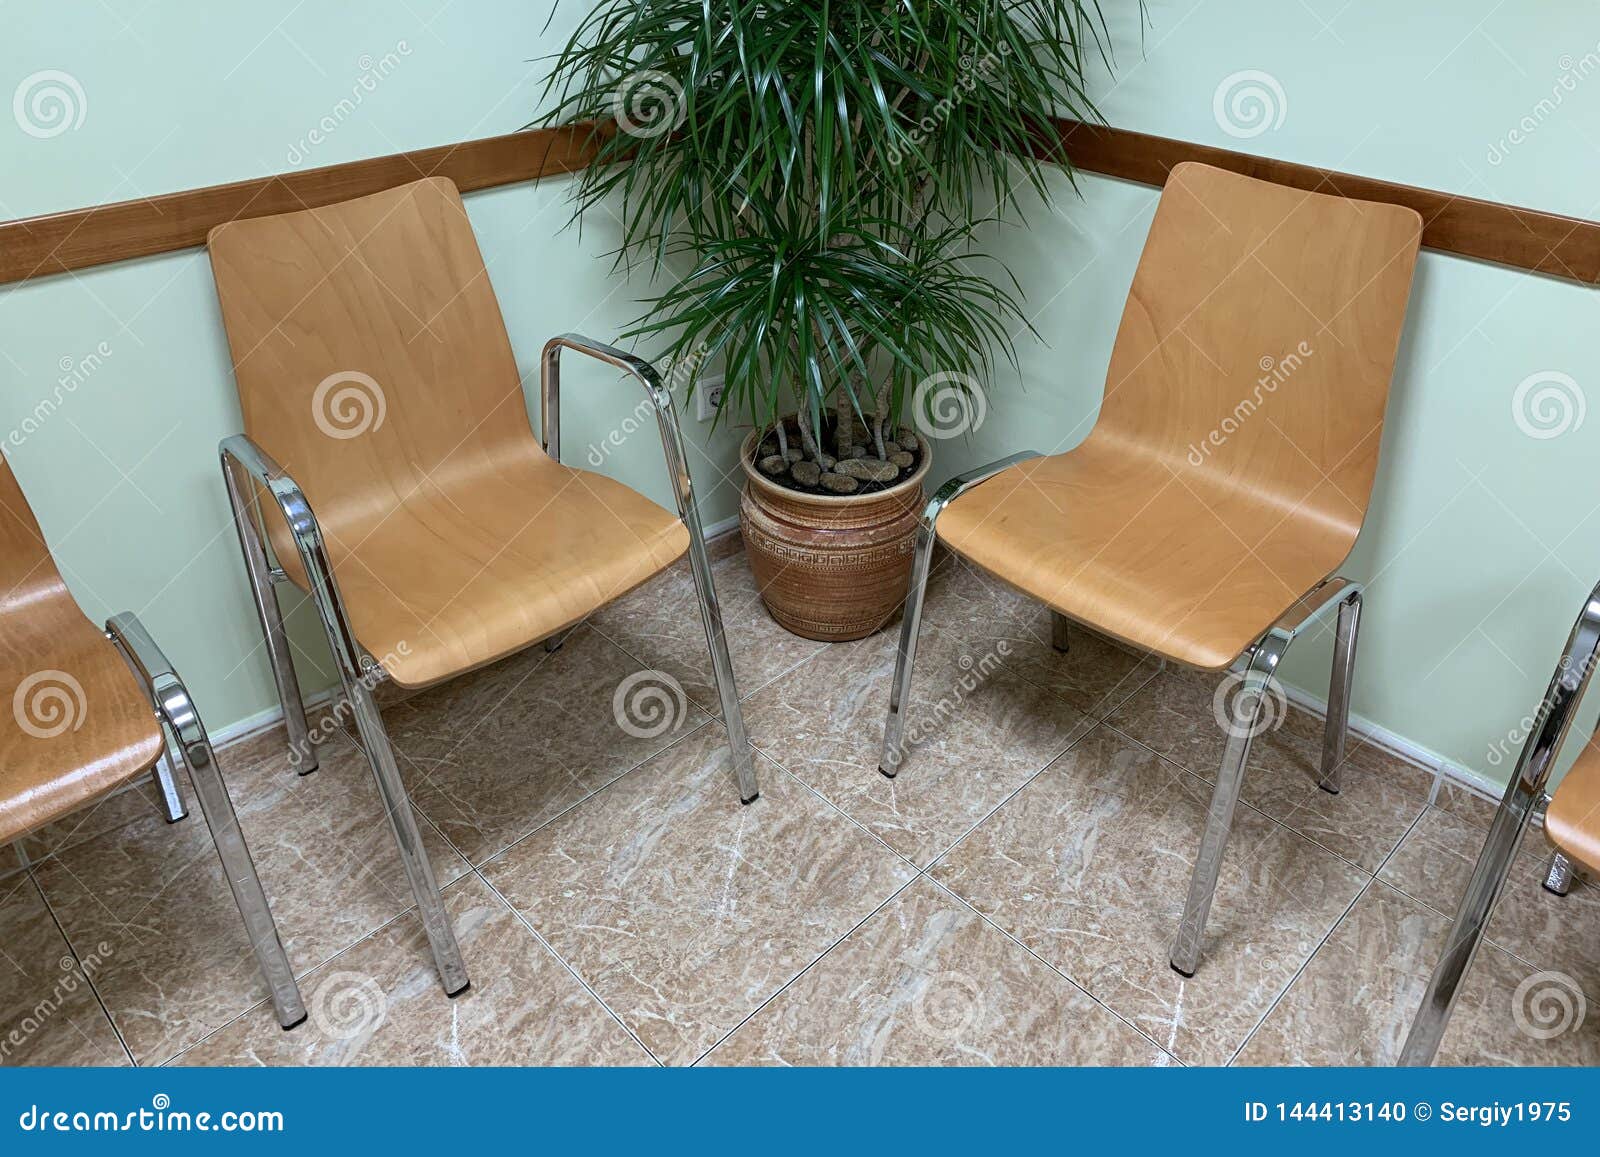 Wooden Chairs In The Waiting Room Stock Photo Image Of Design